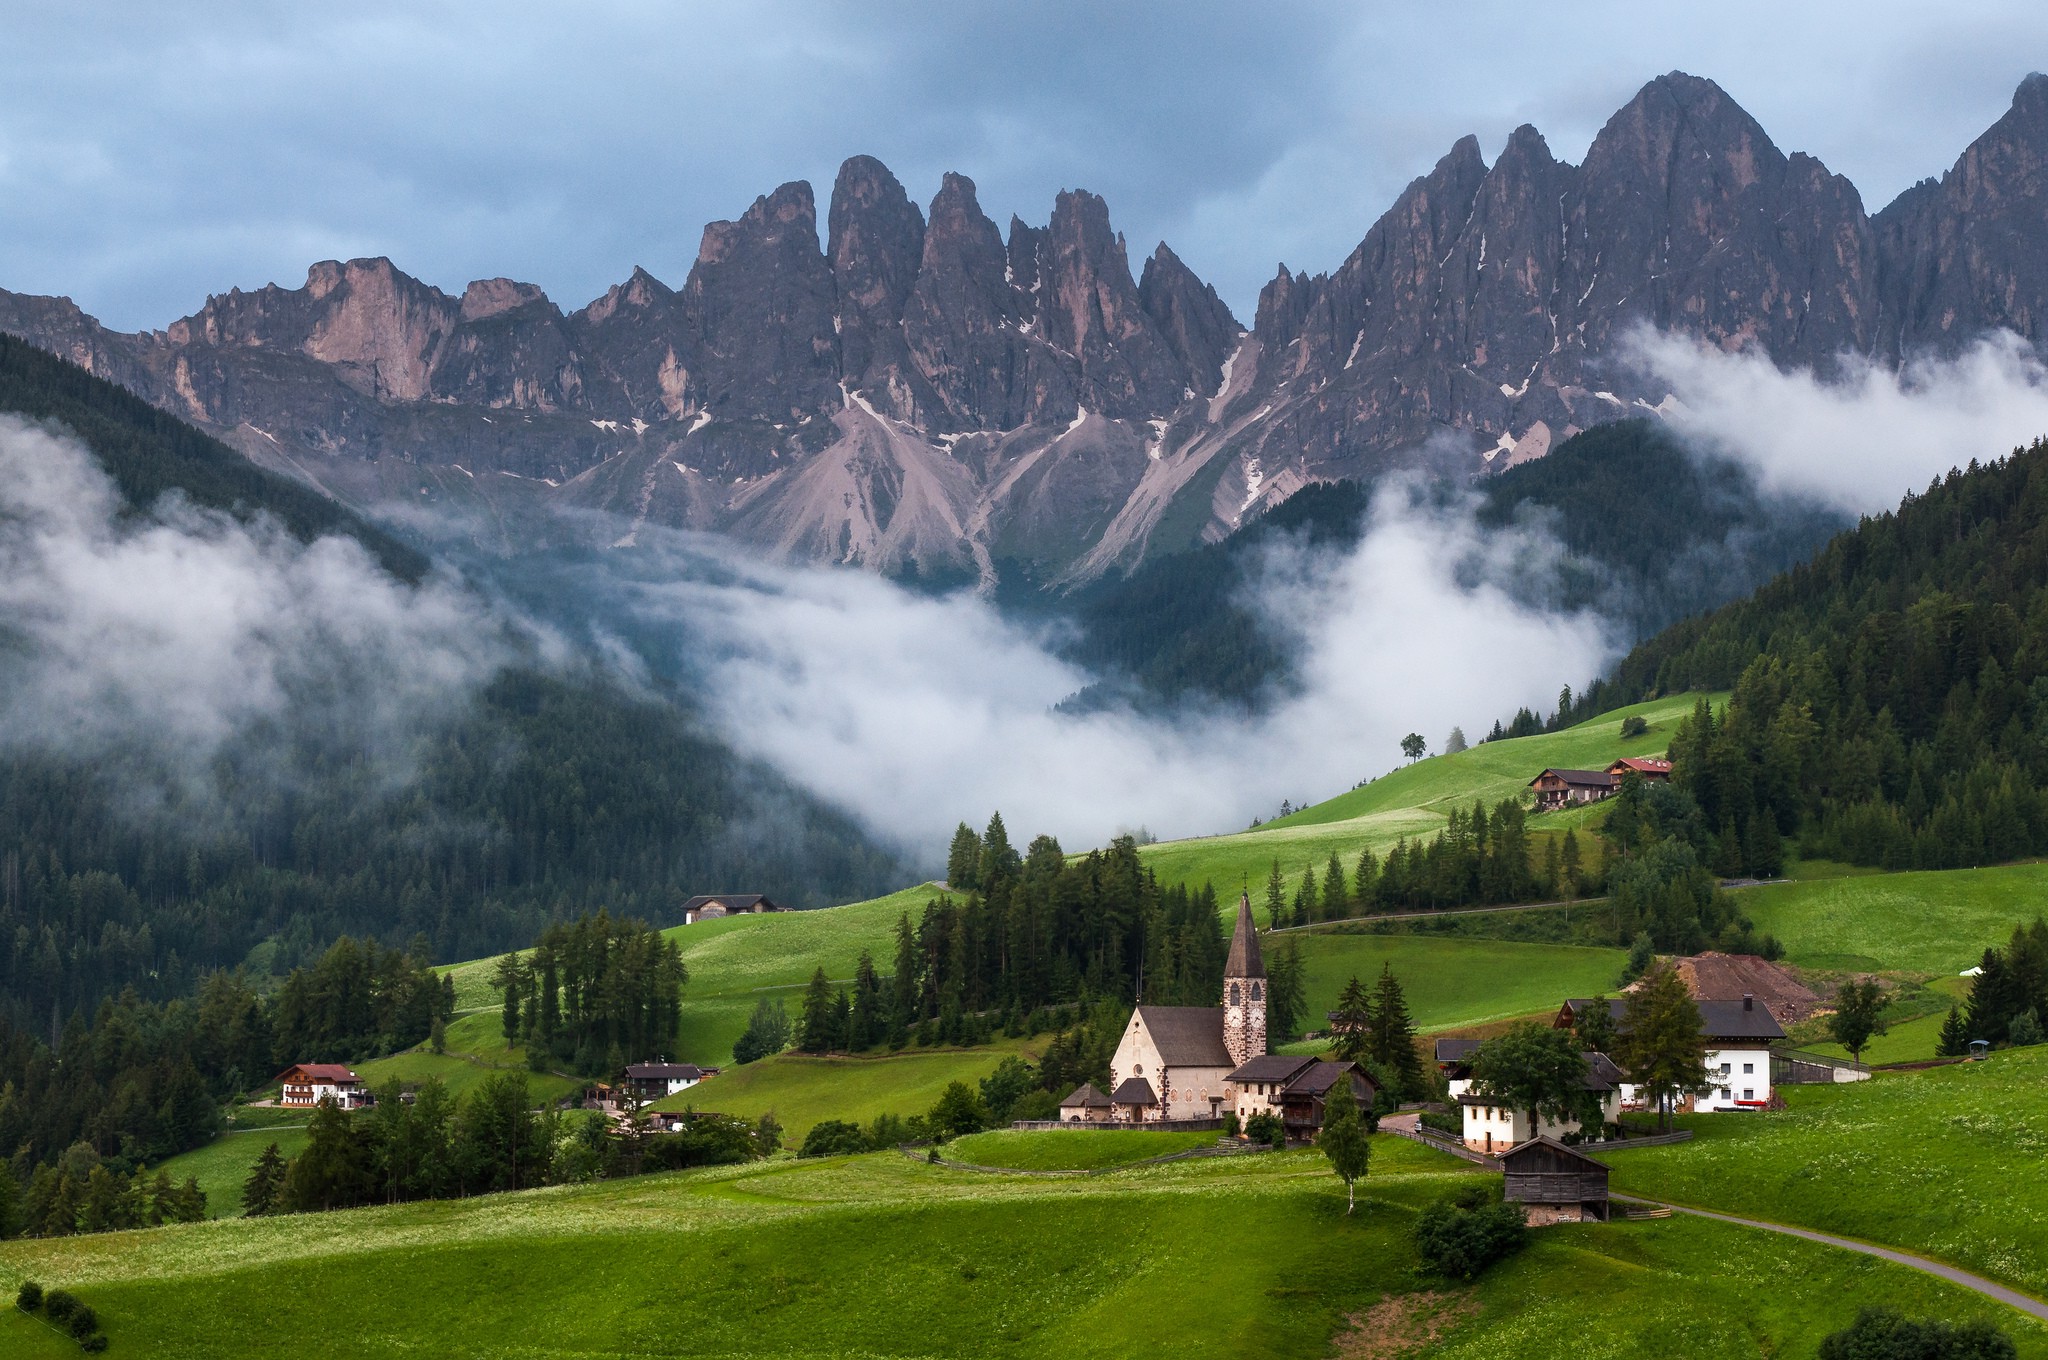 nature, Landscape, Mountain, Clouds, Trees, Italy, Dolomites (mountains), Mist, Forest, Church, Hill, House, Field Wallpaper